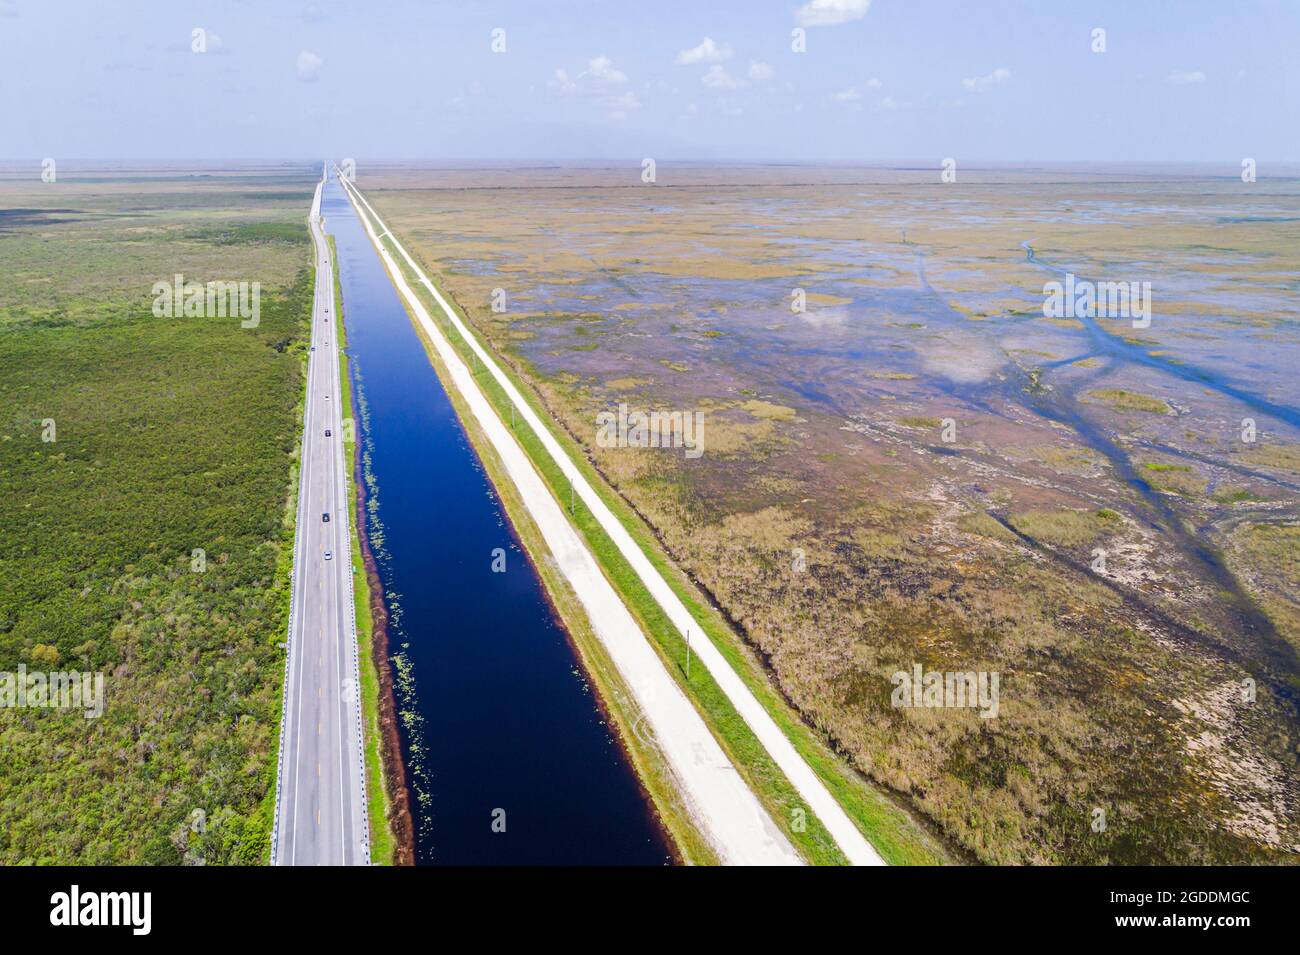 Miami Florida,Everglades National Park,Tamiami Trail US route 41,canal levee dike water conservation area 3A,Francis S. Taylor Wildlife Management Are Stock Photo